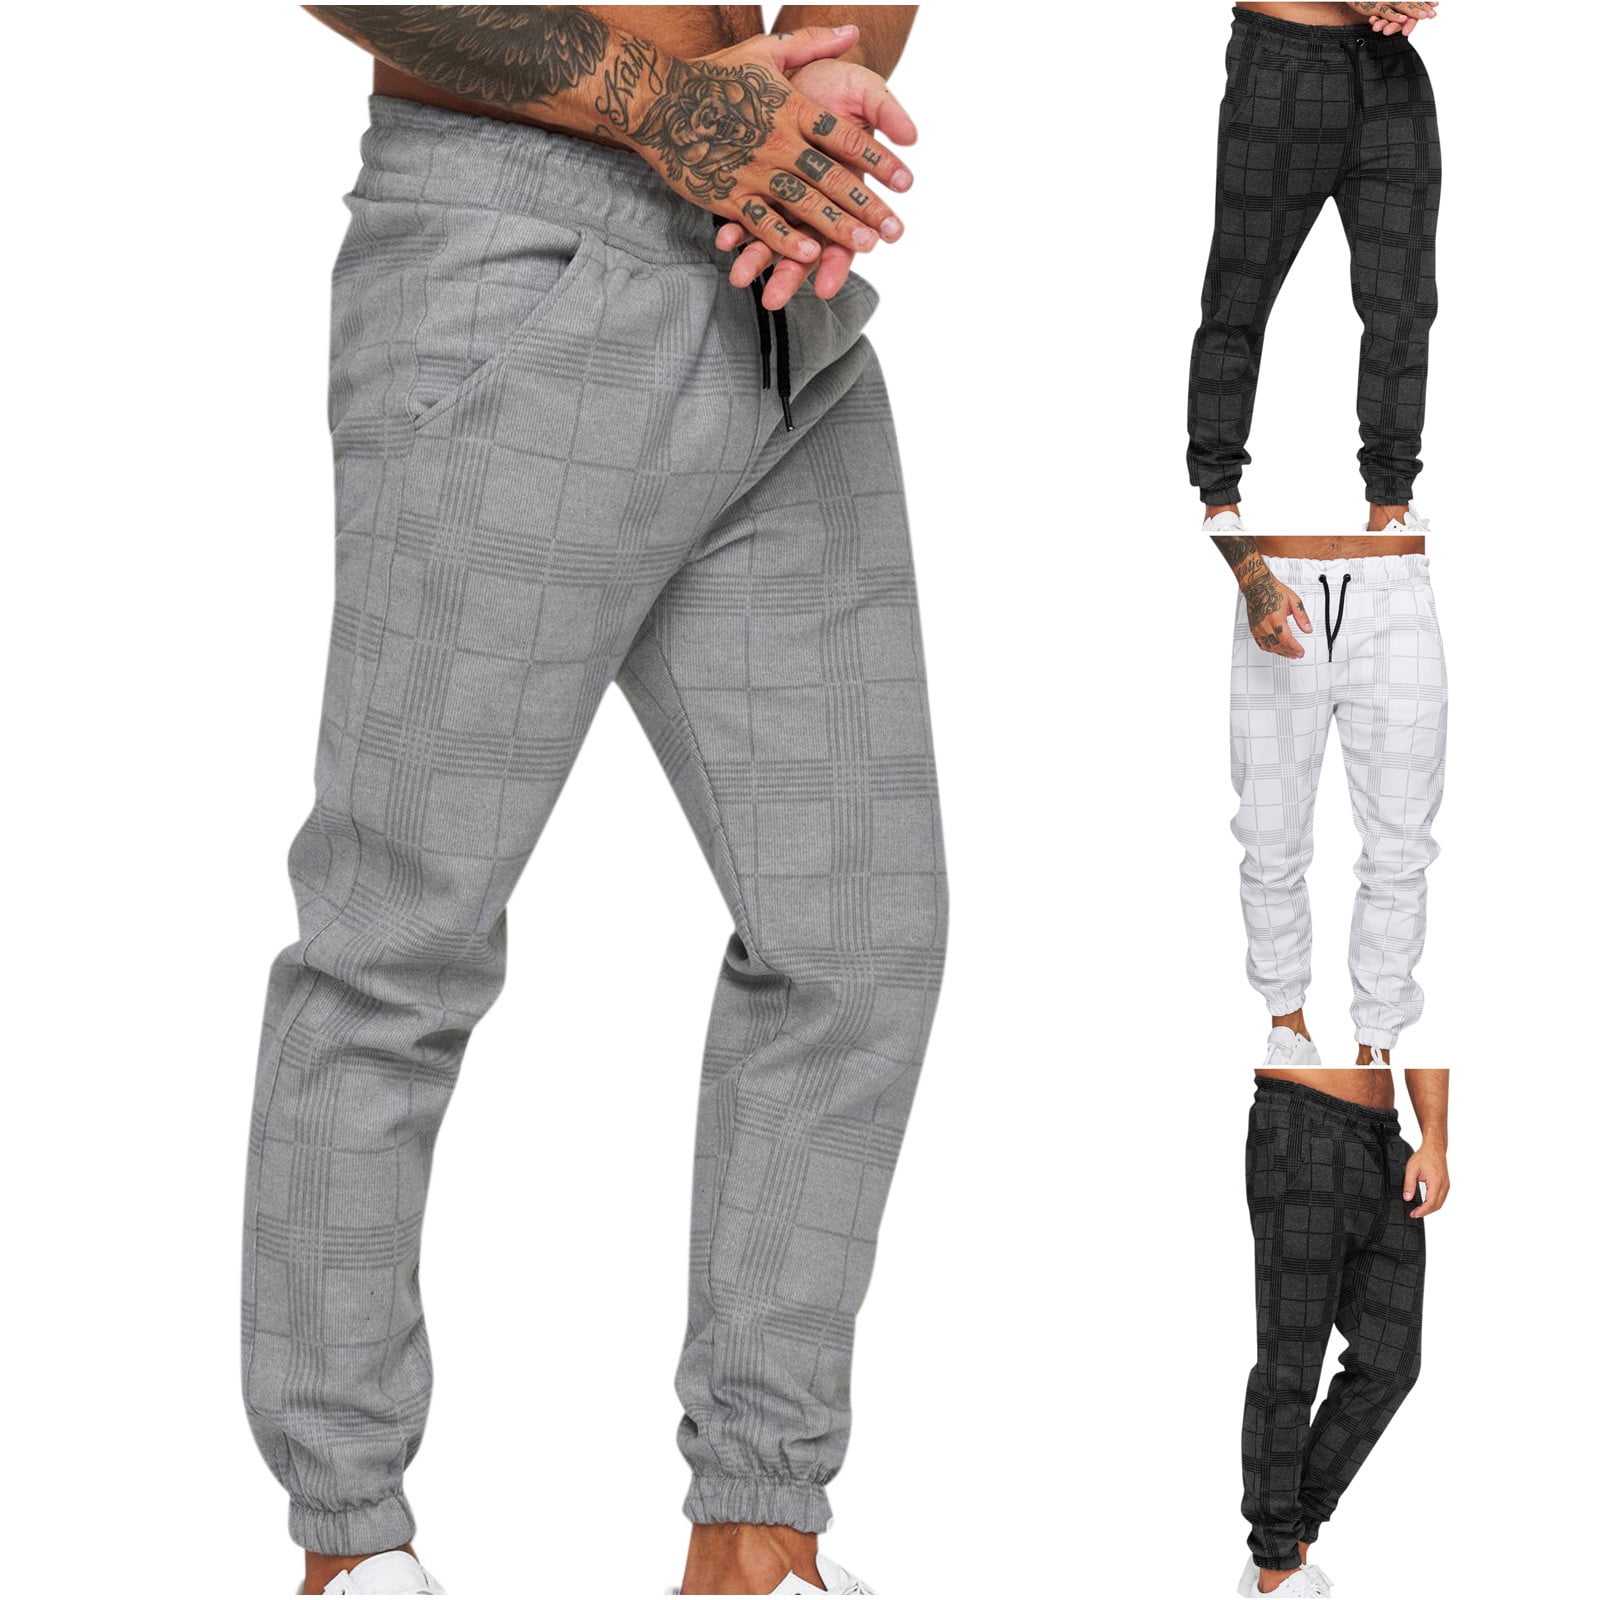 Dezsed Mens Chinos Casual Pants Slim Fit Stretch Plaid Dress Pants  Clearance Men's Square Plaid 3D Digital Printing Striped Fitness Casual  Pants Light ...